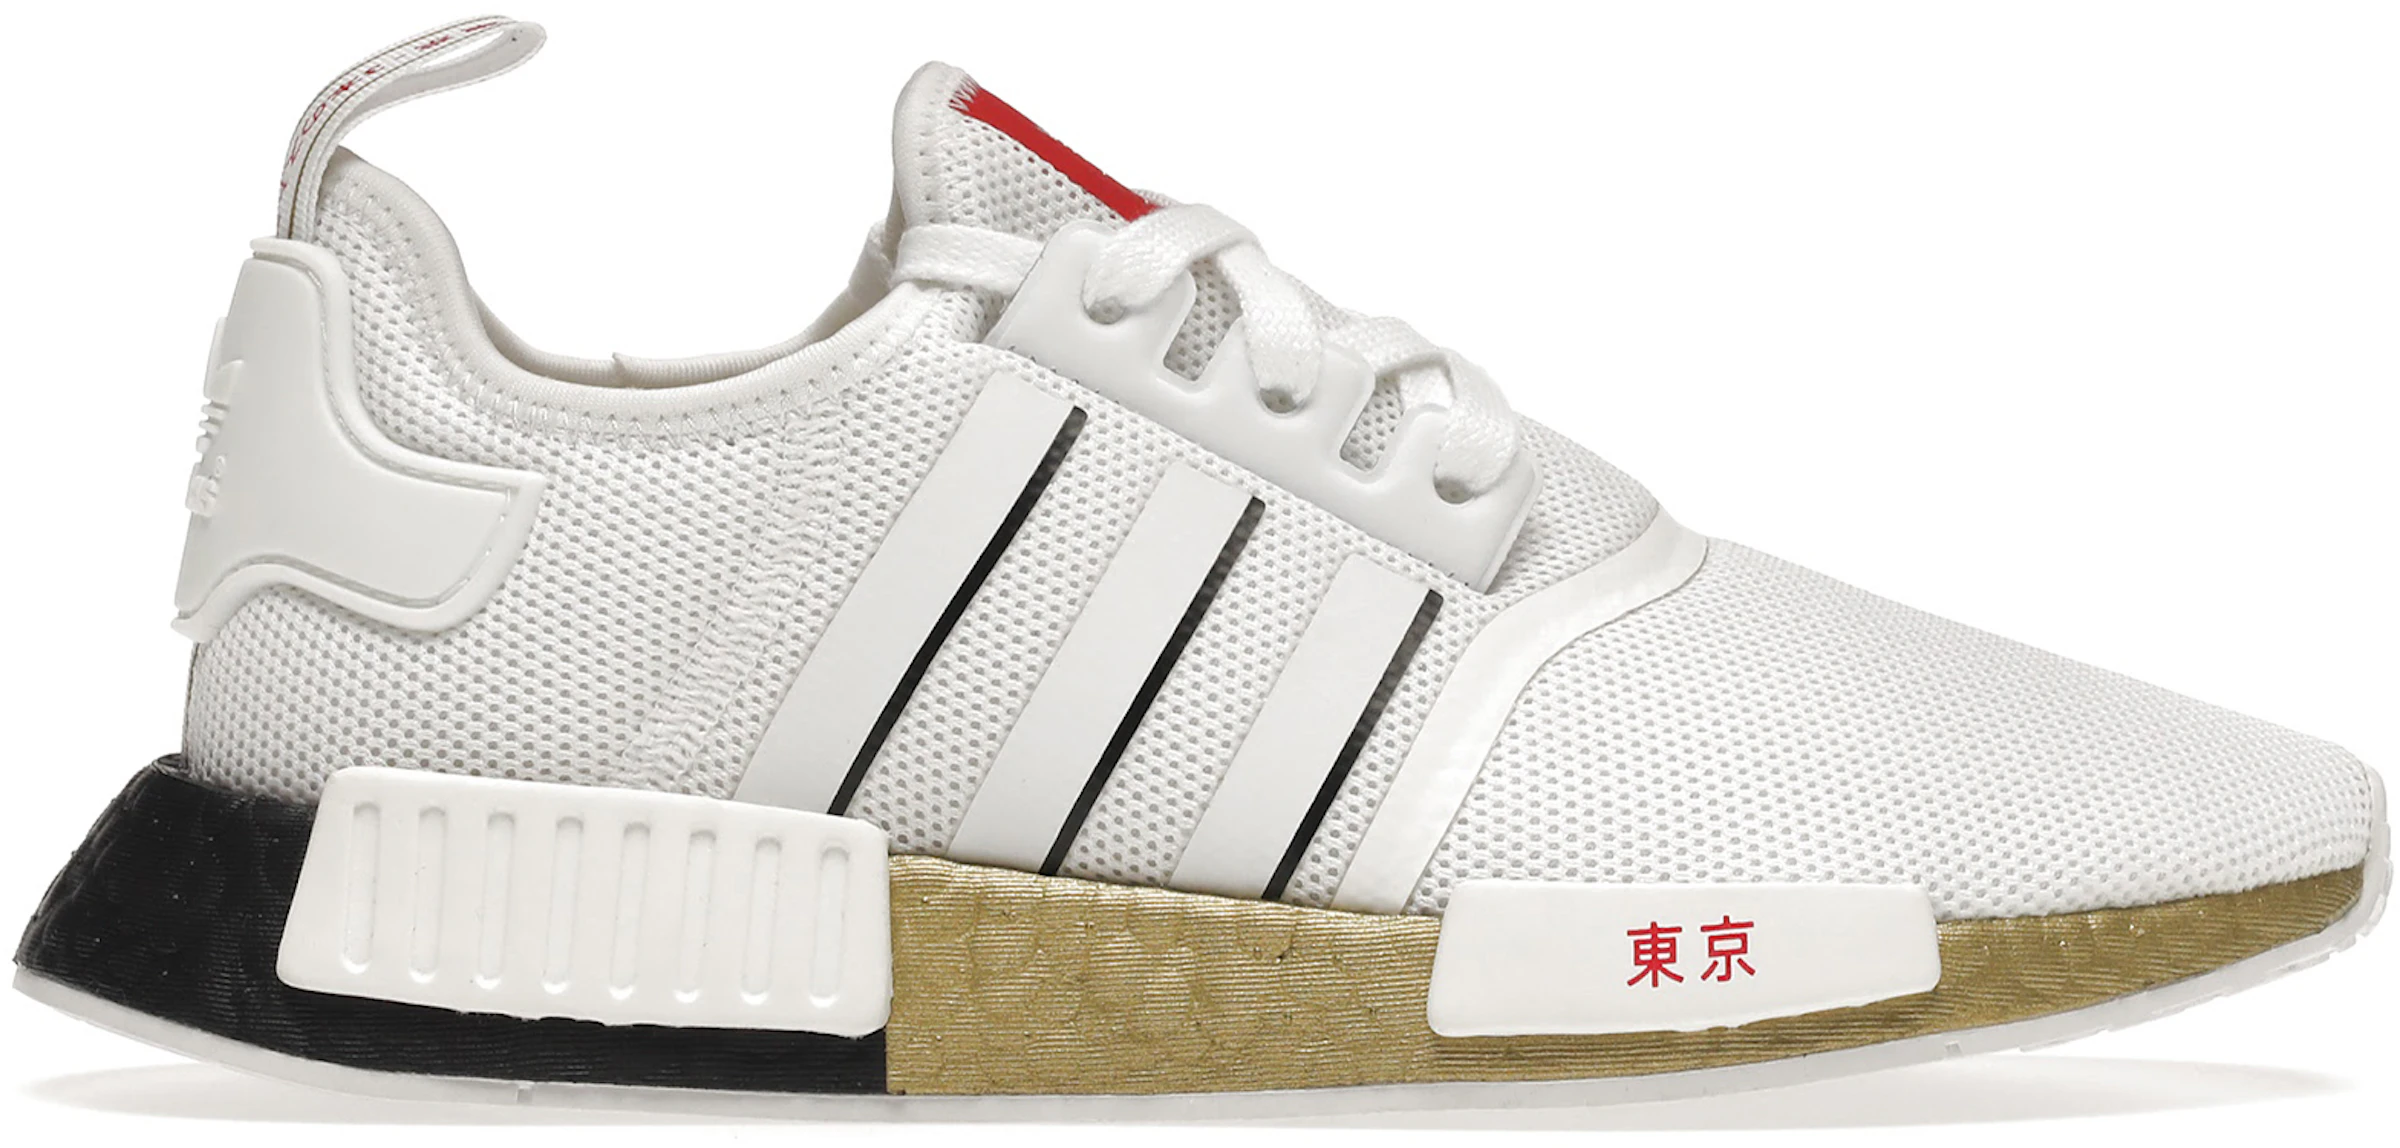 adidas United By Sneakers Tokyo FY1159 -